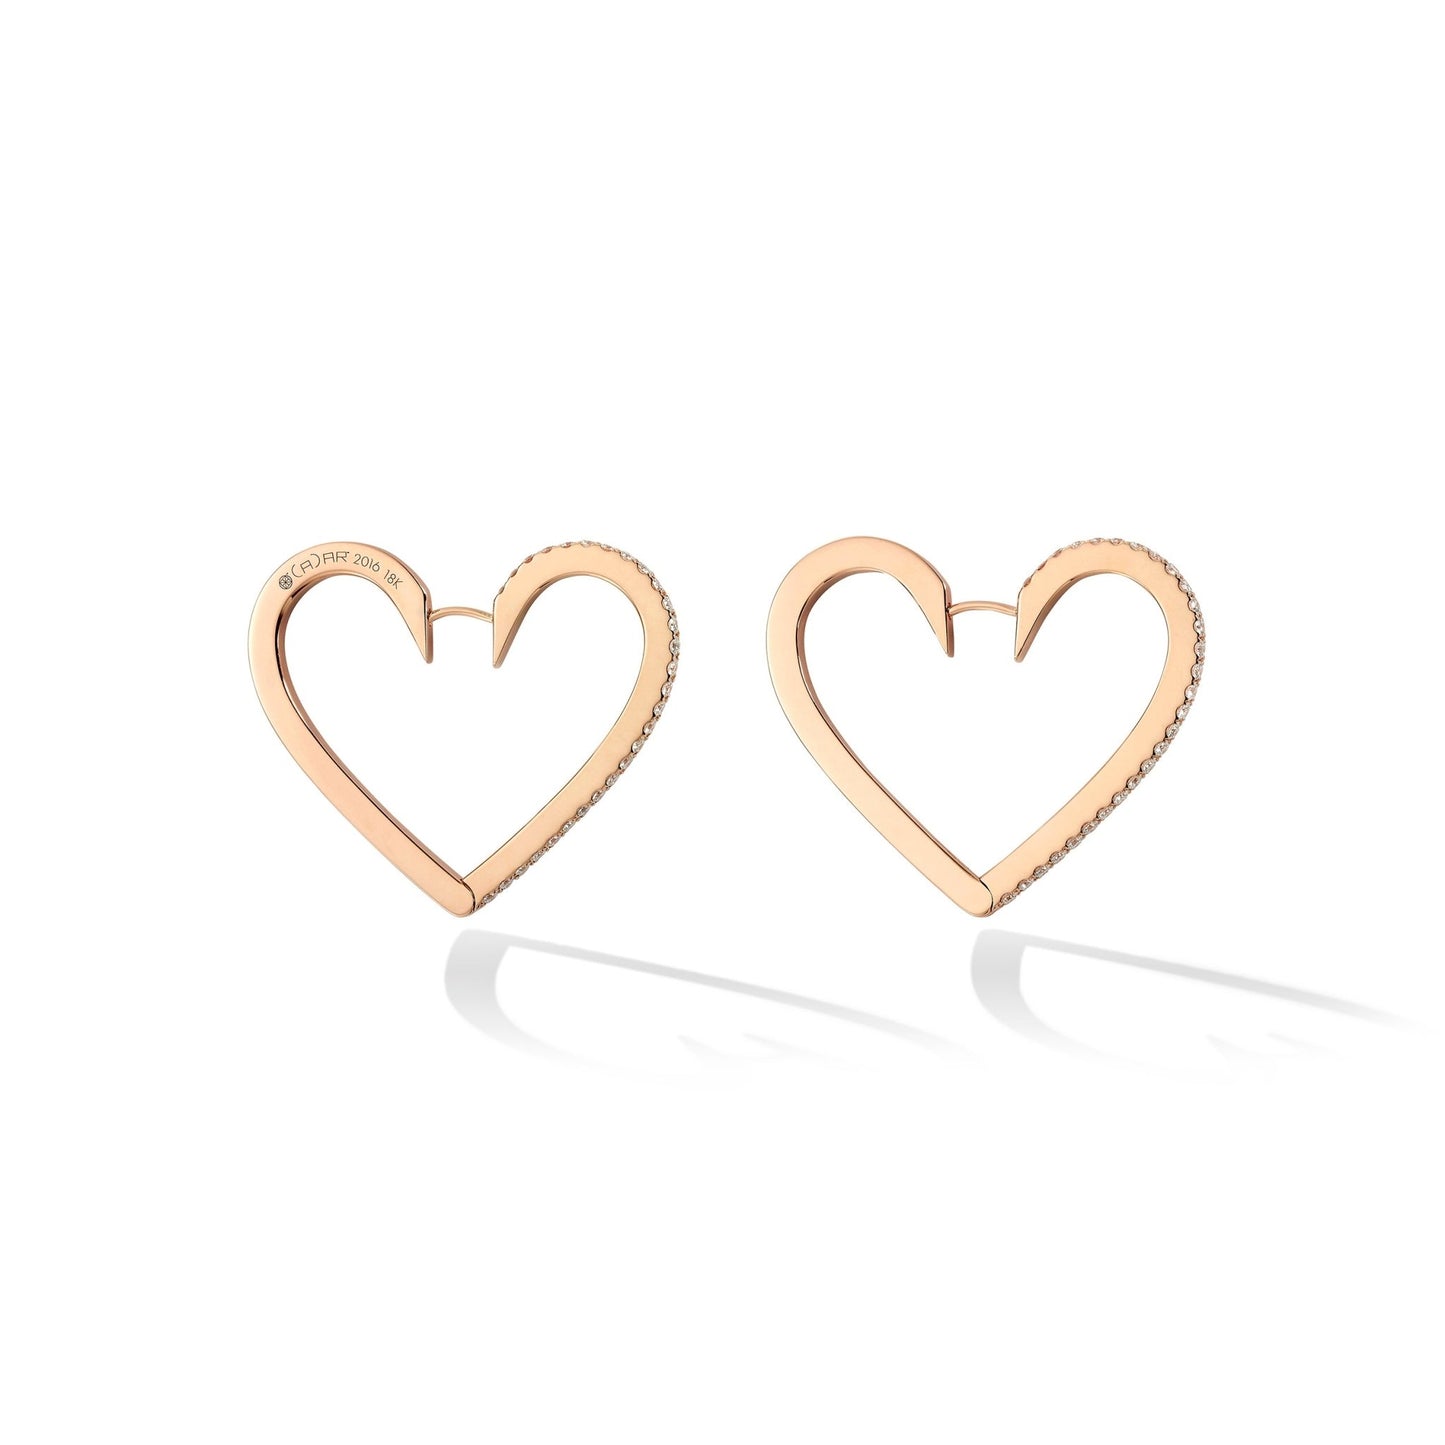 Large Rose Gold Endless Hoop Earrings with White Diamonds - Cadar